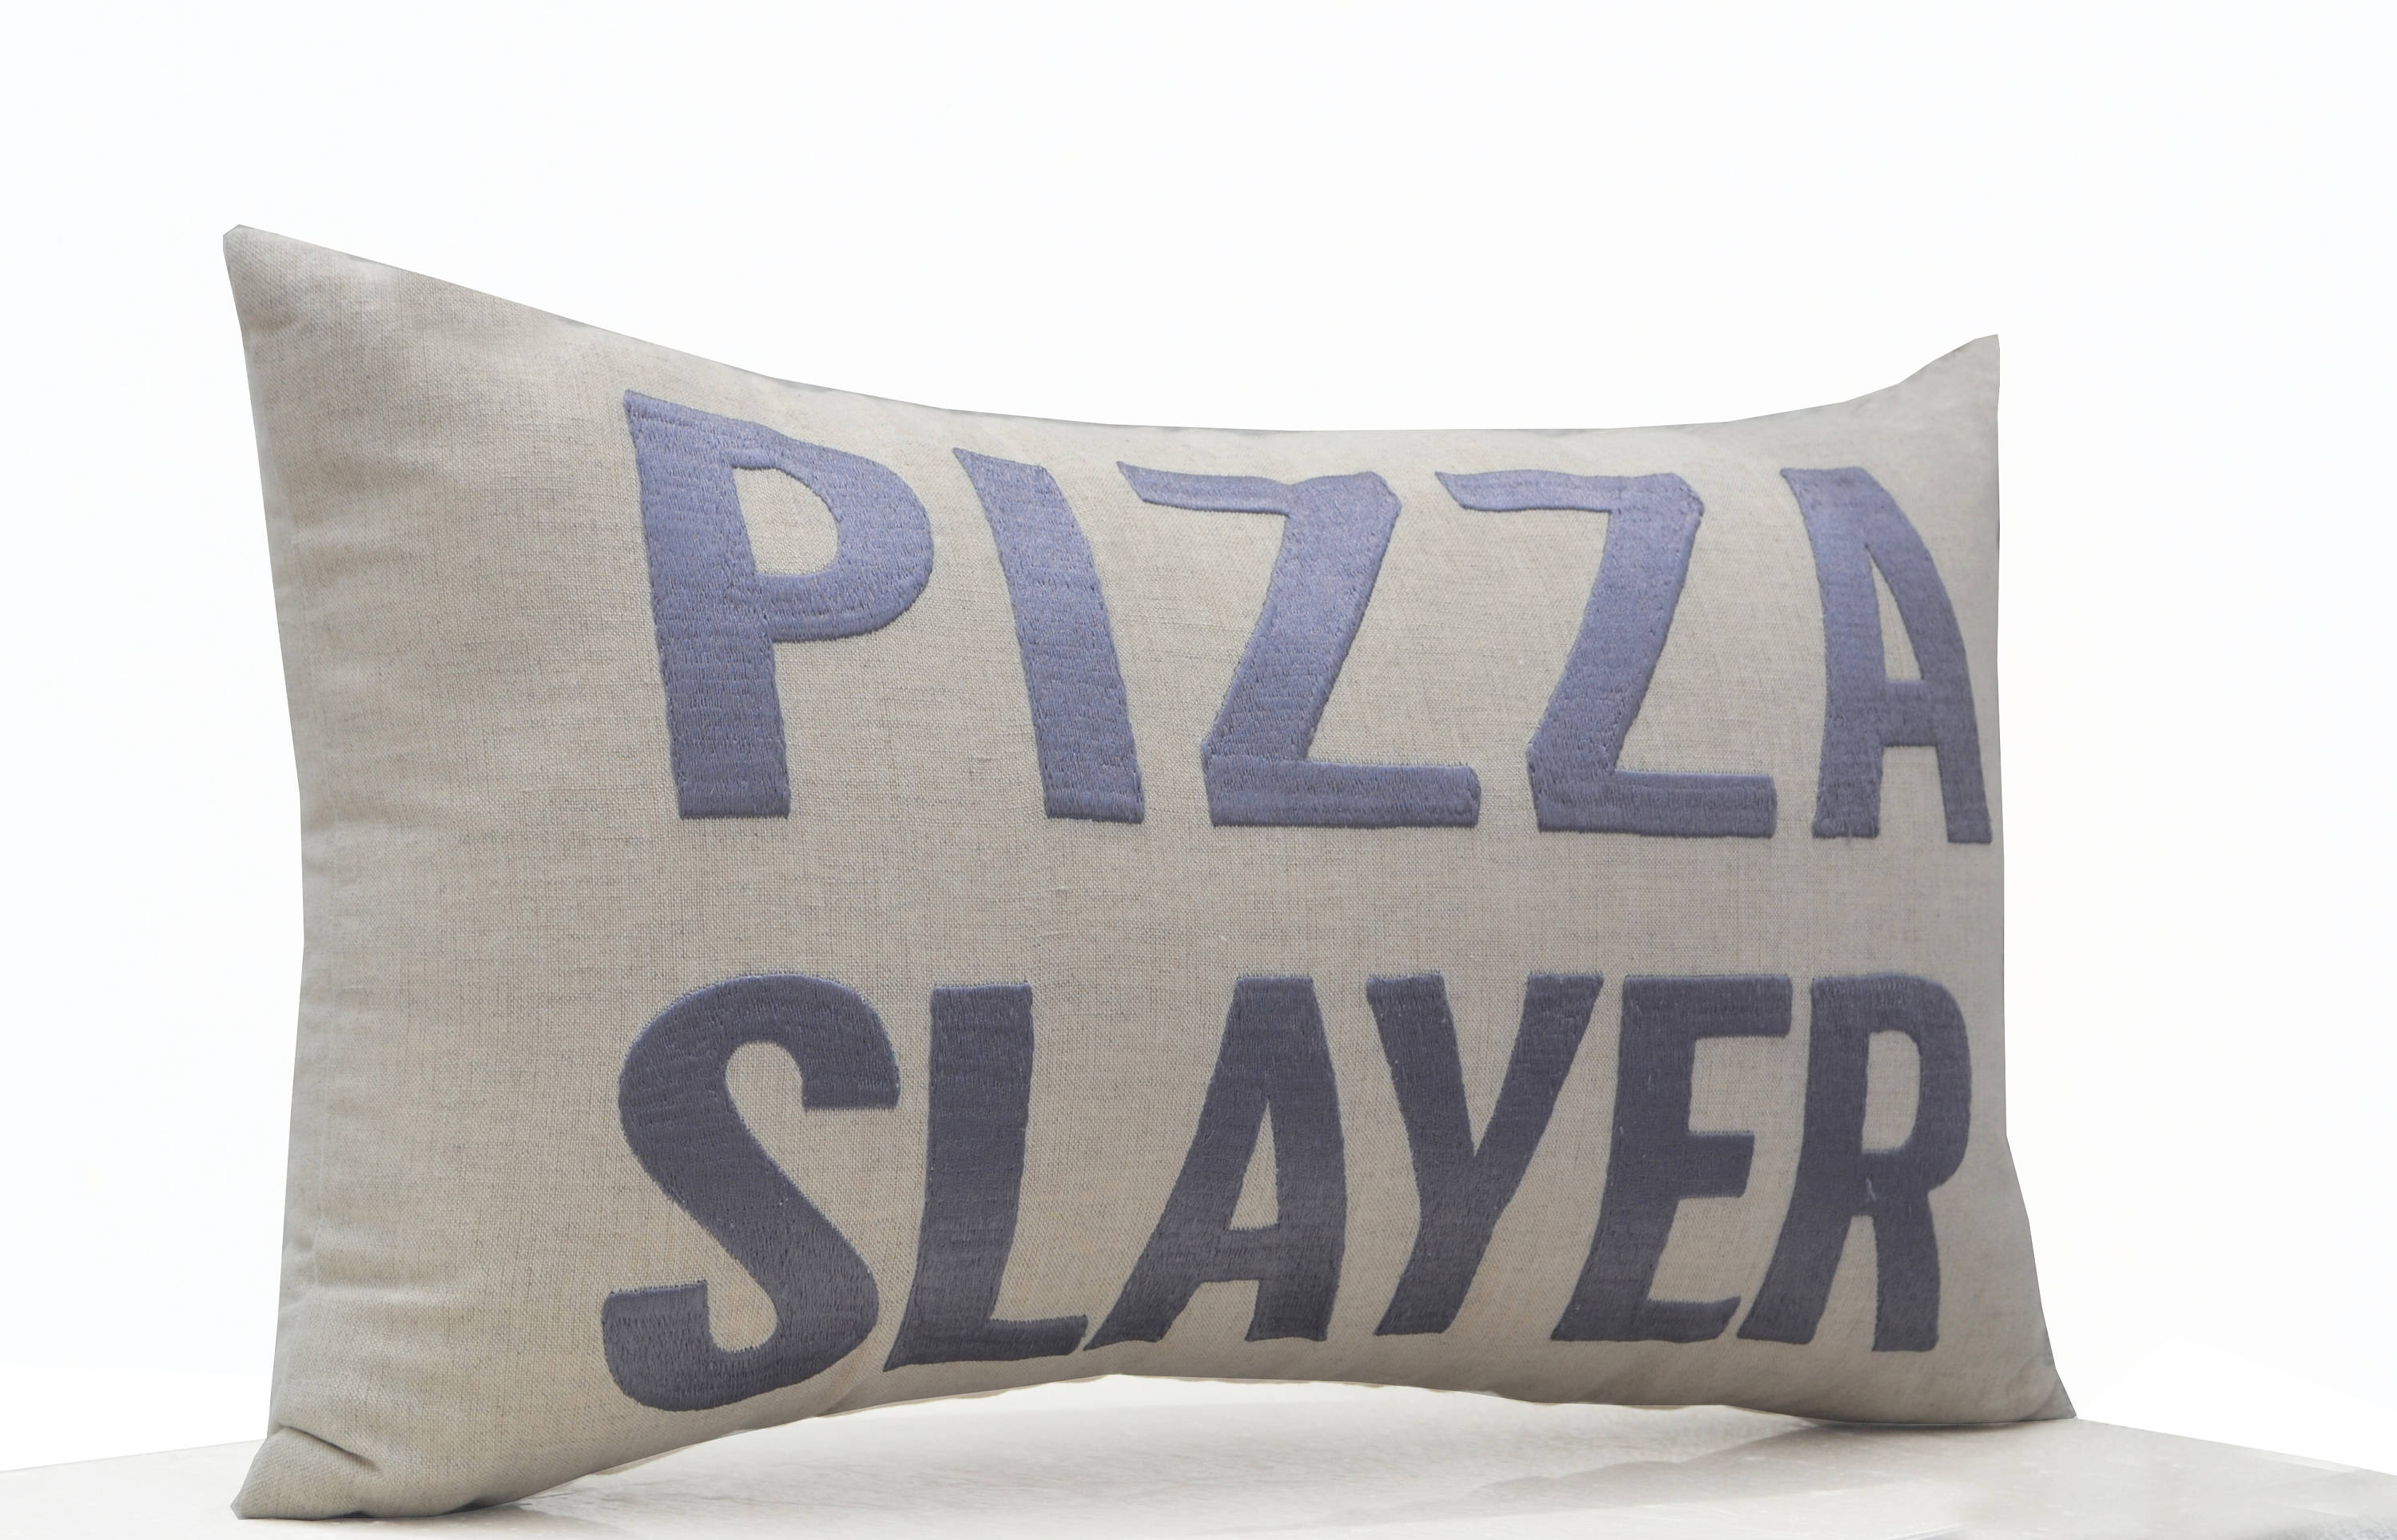 Handcrafted embroidered pillow cover, Pizza slayer cushion